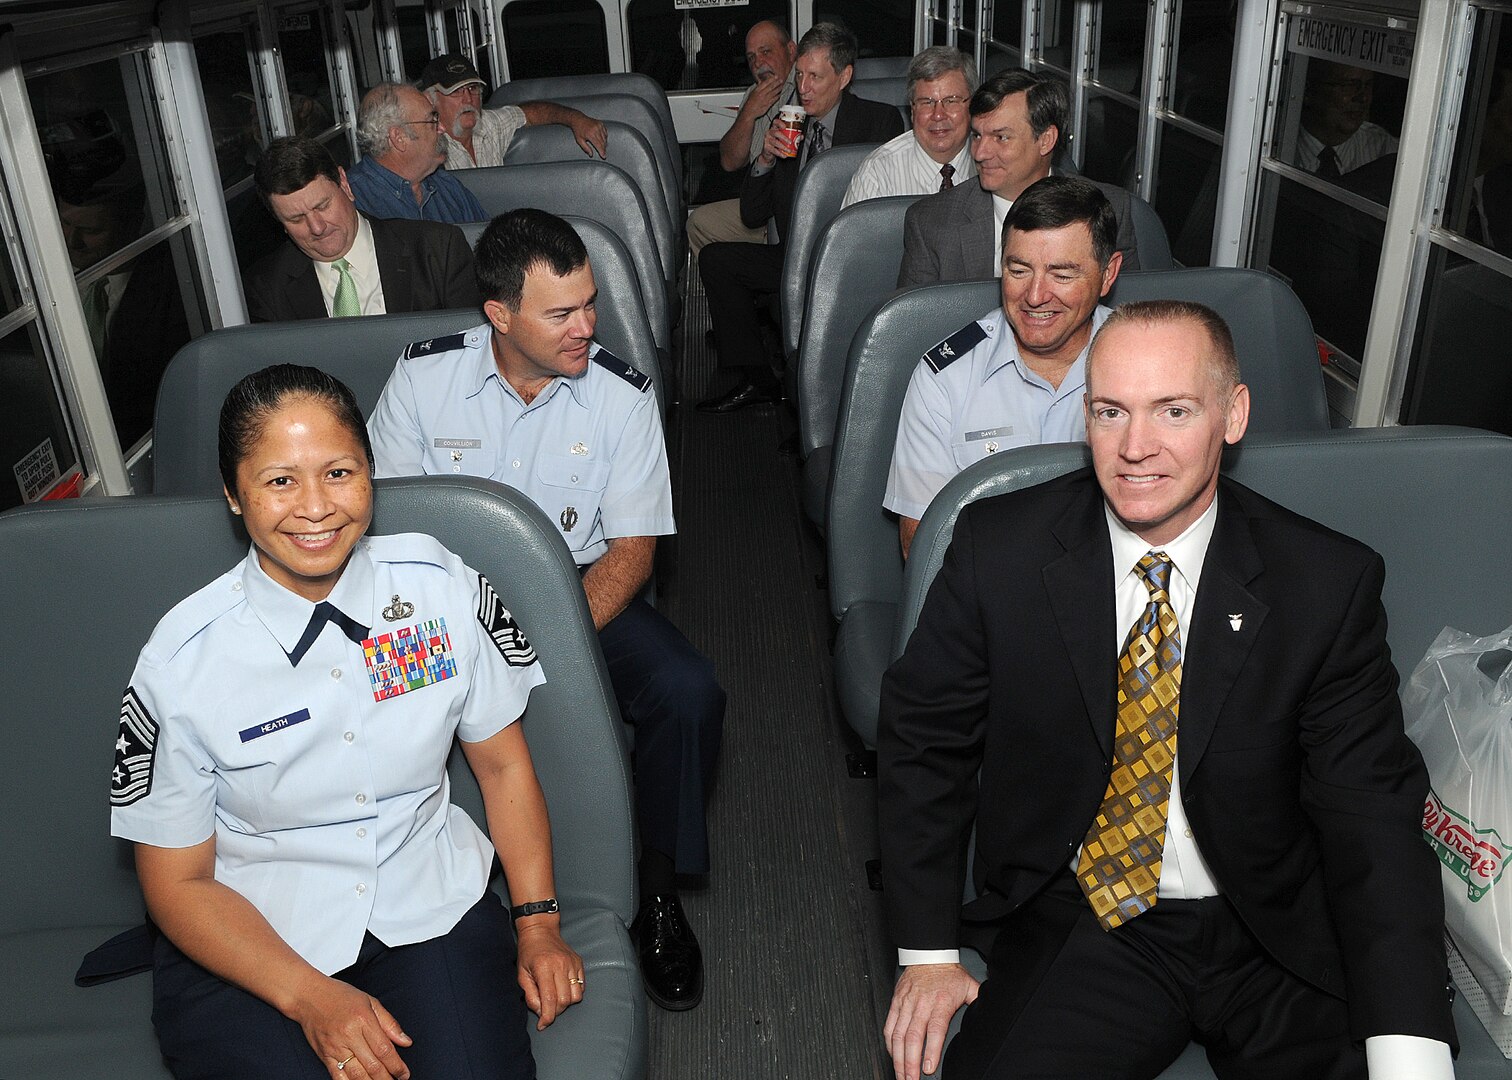 Randolph AFB, TX, 4/4/2011:  Dr. Todd Fore and Chief Master Sgt. Arleen Heath  get front seats on the inaugural run of the new Headquarters Air Force Personnel Center shuttle bus  early April 4, 2011 on Randolph Air Force Base, Texas. During renovation of HQ AFPC the bus service will shuttle  personnel from the parking lot between the Kendrick Enlisted Club and the P-Xtra  to their temporary offices in  building 977 daily from 6-8 a.m., 11-1  p.m. and 3-5 p.m.  The bus will also pick up passengers at HQ AFPC and the parking lot south of hangar 16. Dr. Fore is the HQ AFPC Executive Director, and CMSgt. Heath is the AFPC Command Chief. Seated directly behind them are Col. Jerry Couvillion, left,  AFPC Deputy Director of Assignments  and Col. Jim Davis, Director of Total Force Service Center. The shuttle bus service is being offered because of limited parking at building 977 which is located behind Chapel 2. (U.S. Air Force photo/David Terry)